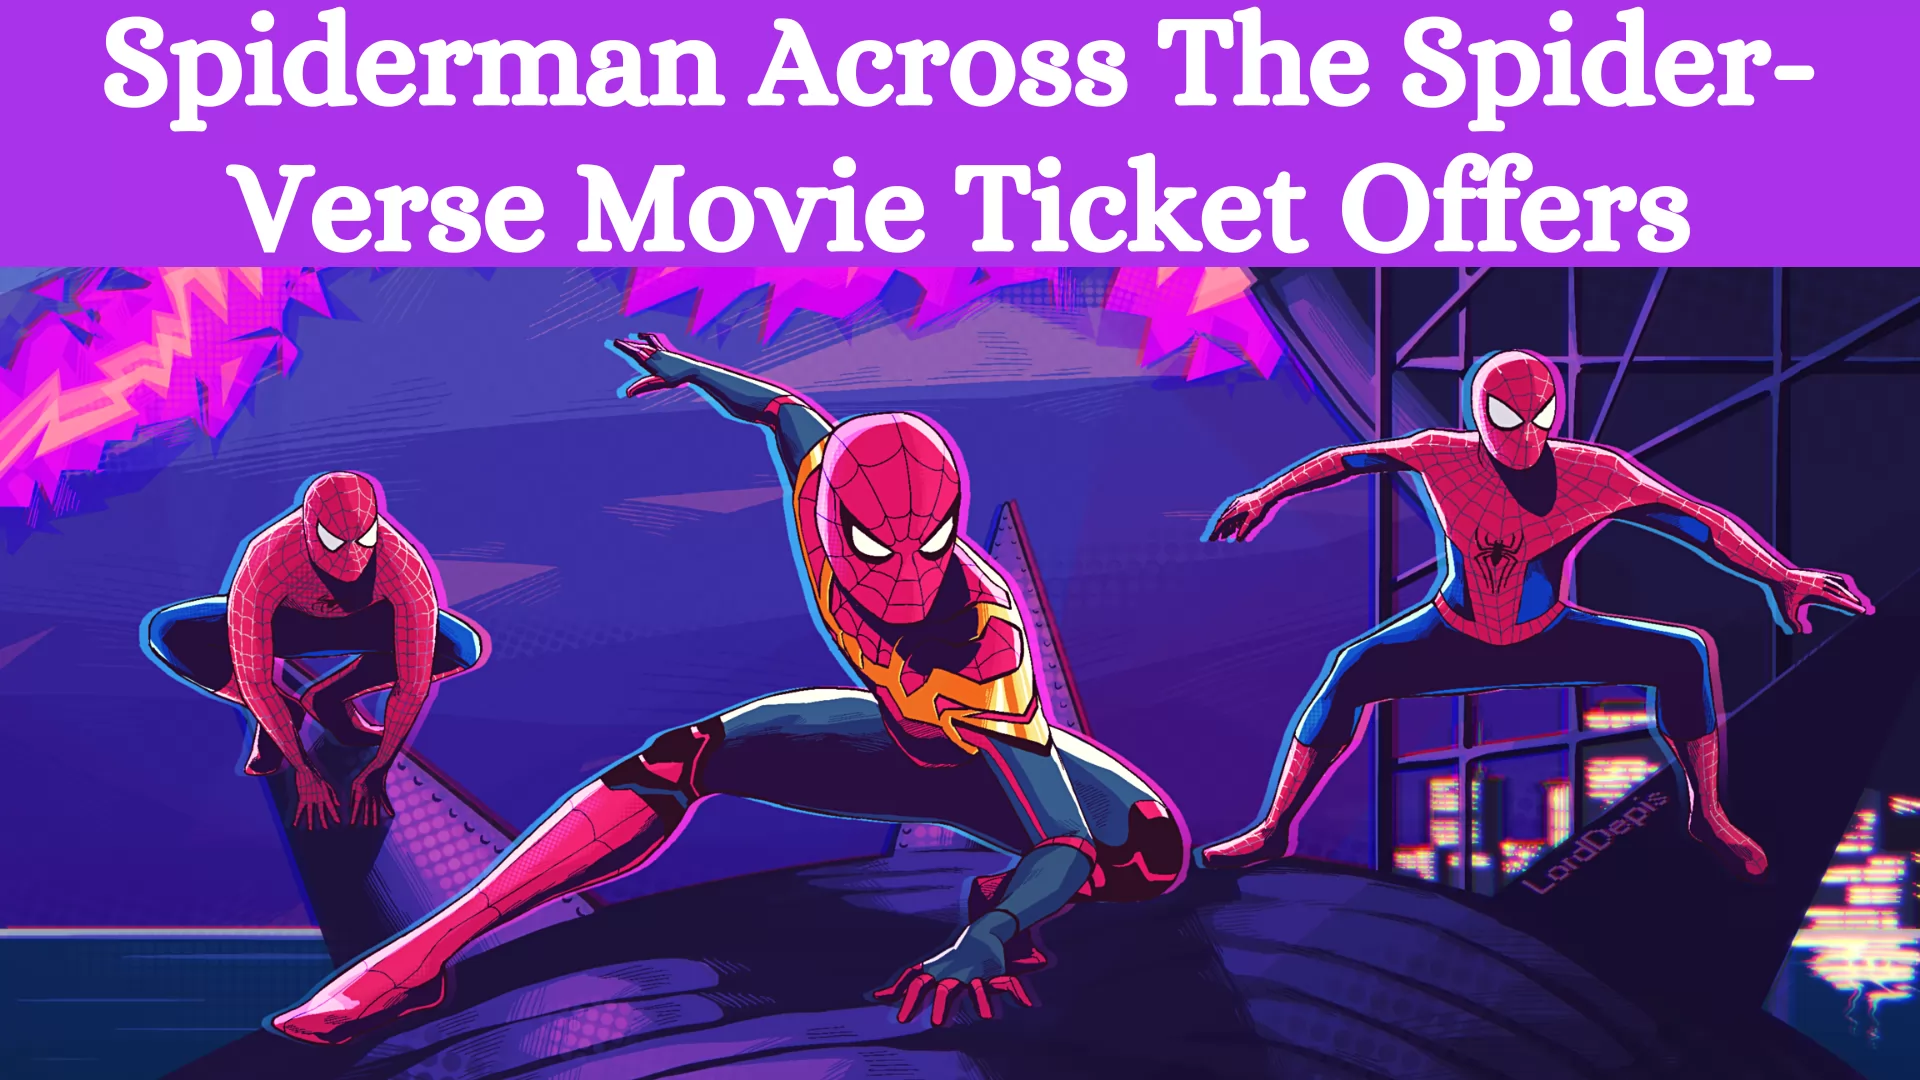 Spiderman Across The Spider-Verse Movie Ticket Offers